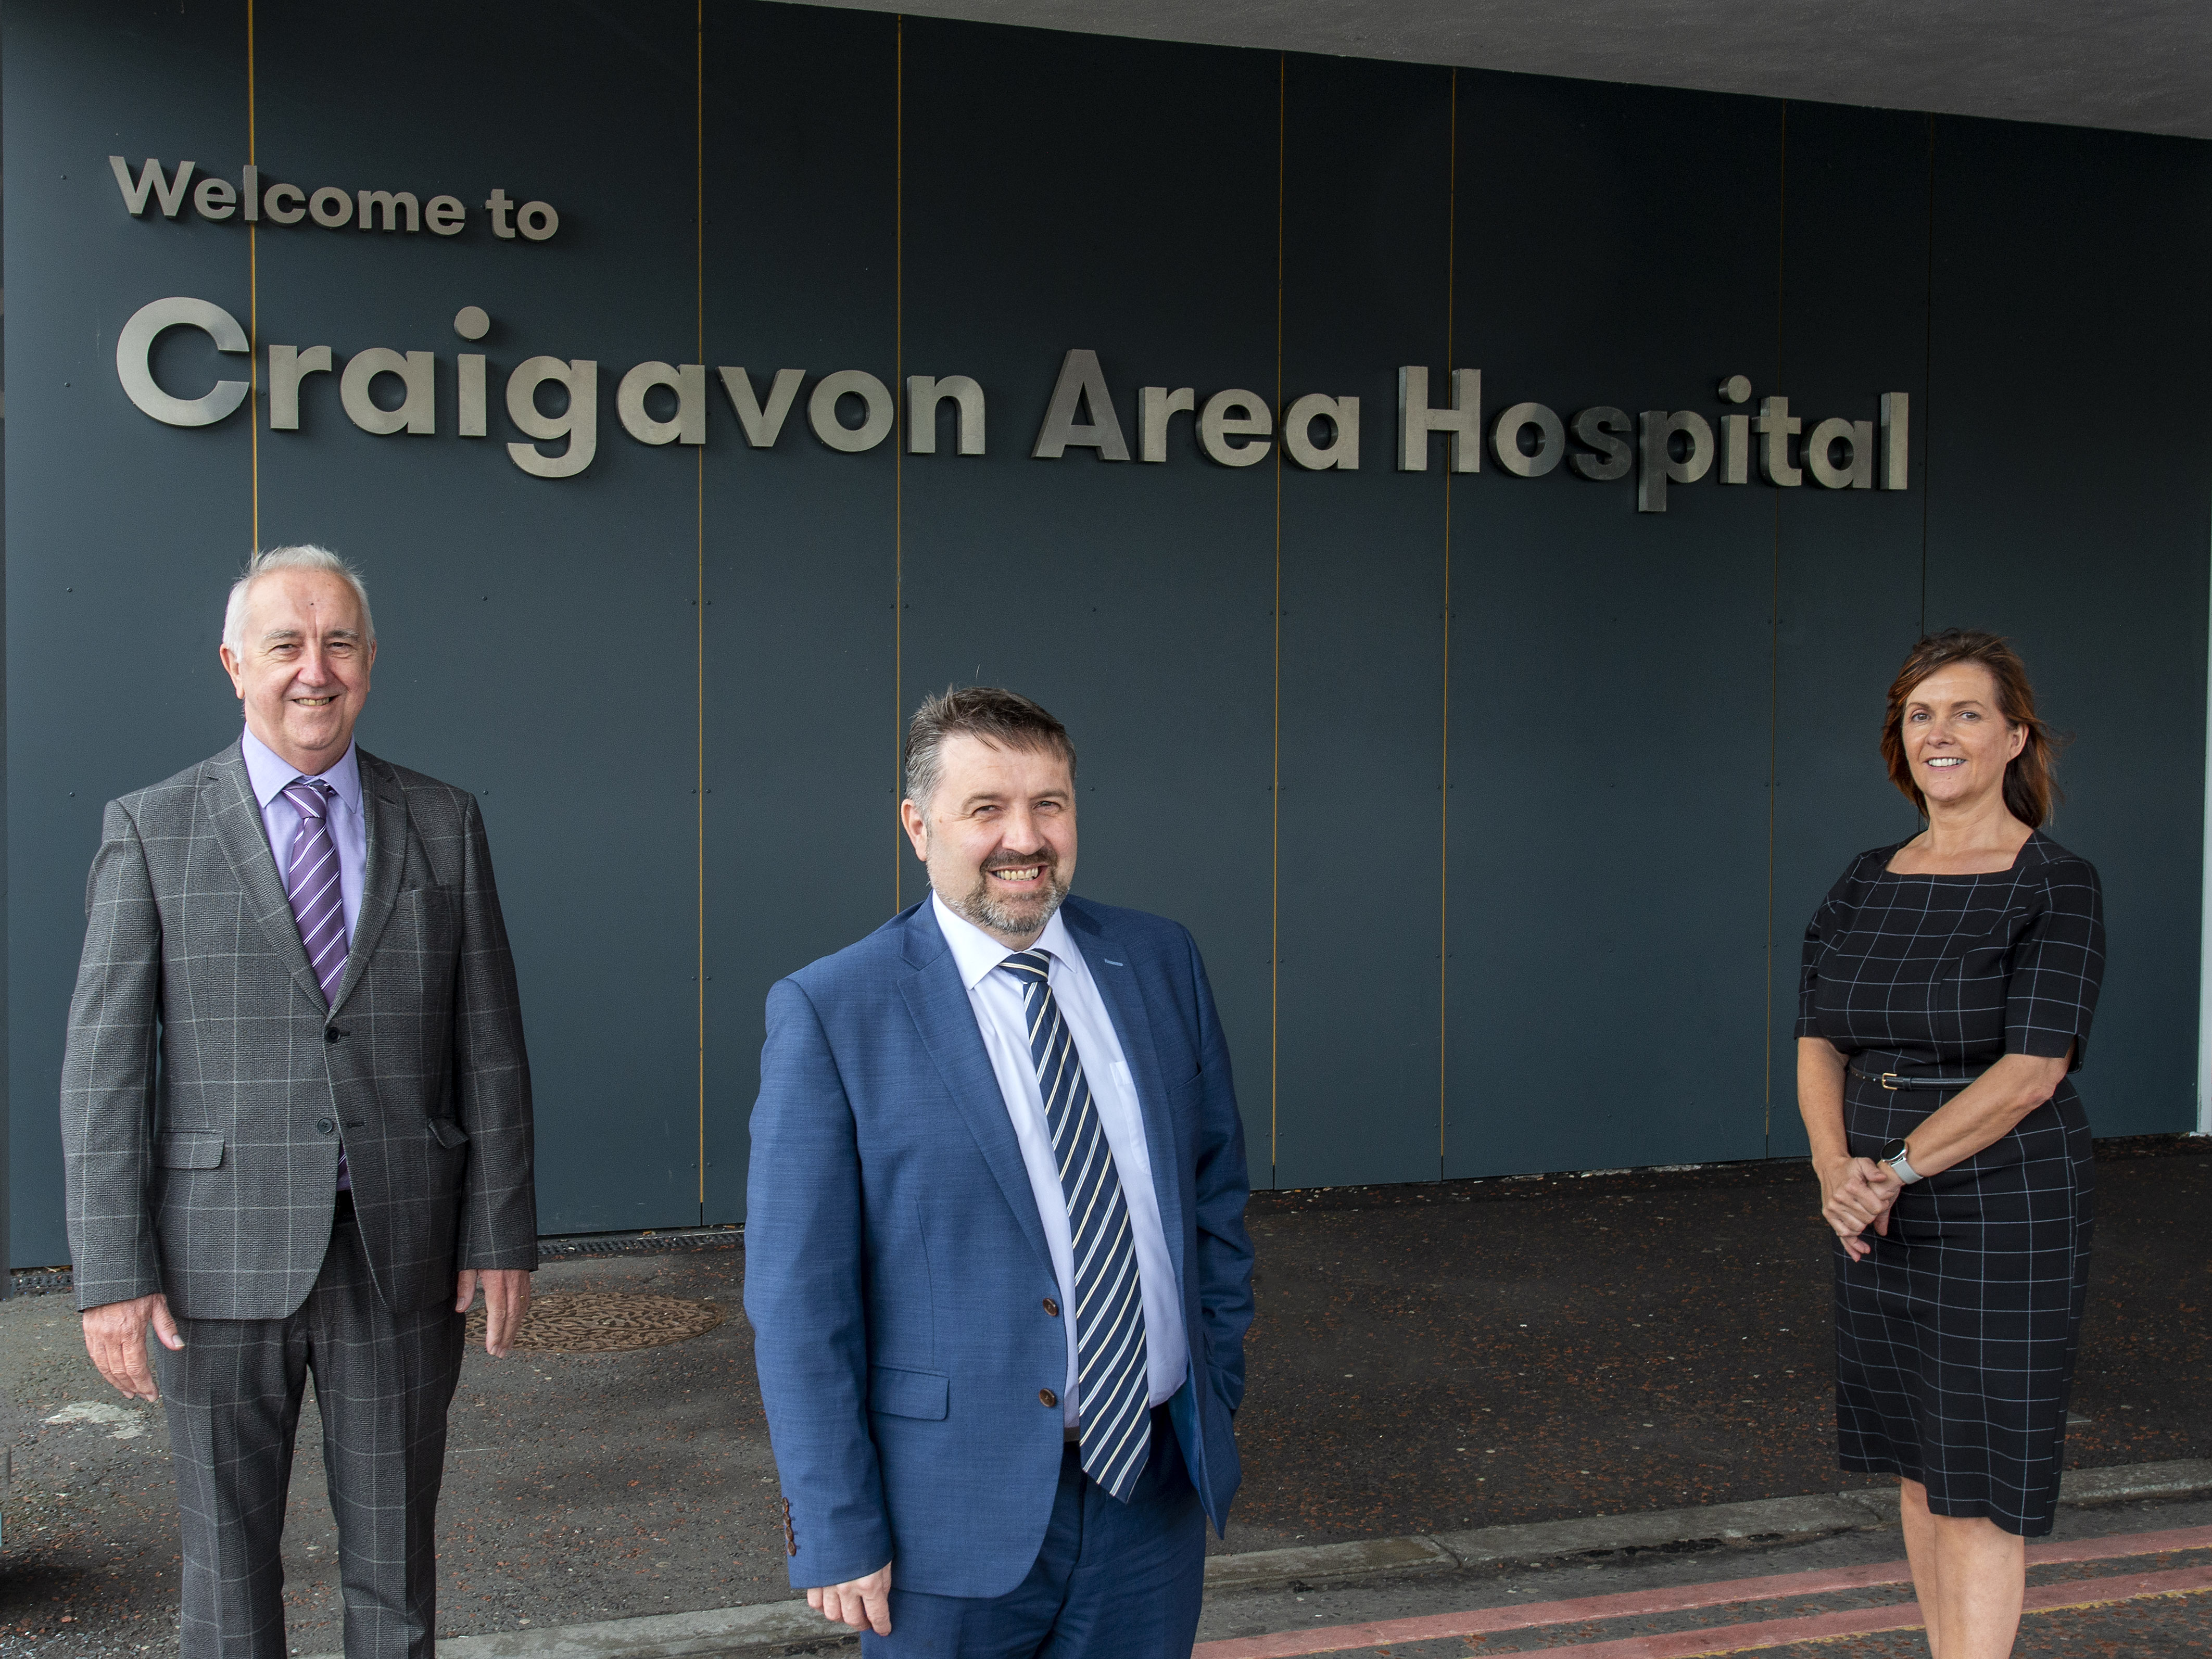 Pictured outside Craigavon Area Hospital are Health Minister Robin Swann with Martin McDonald, Non- Executive Director Southern Health and Social Care Trust and Melanie McClements, Director of Acute Services 